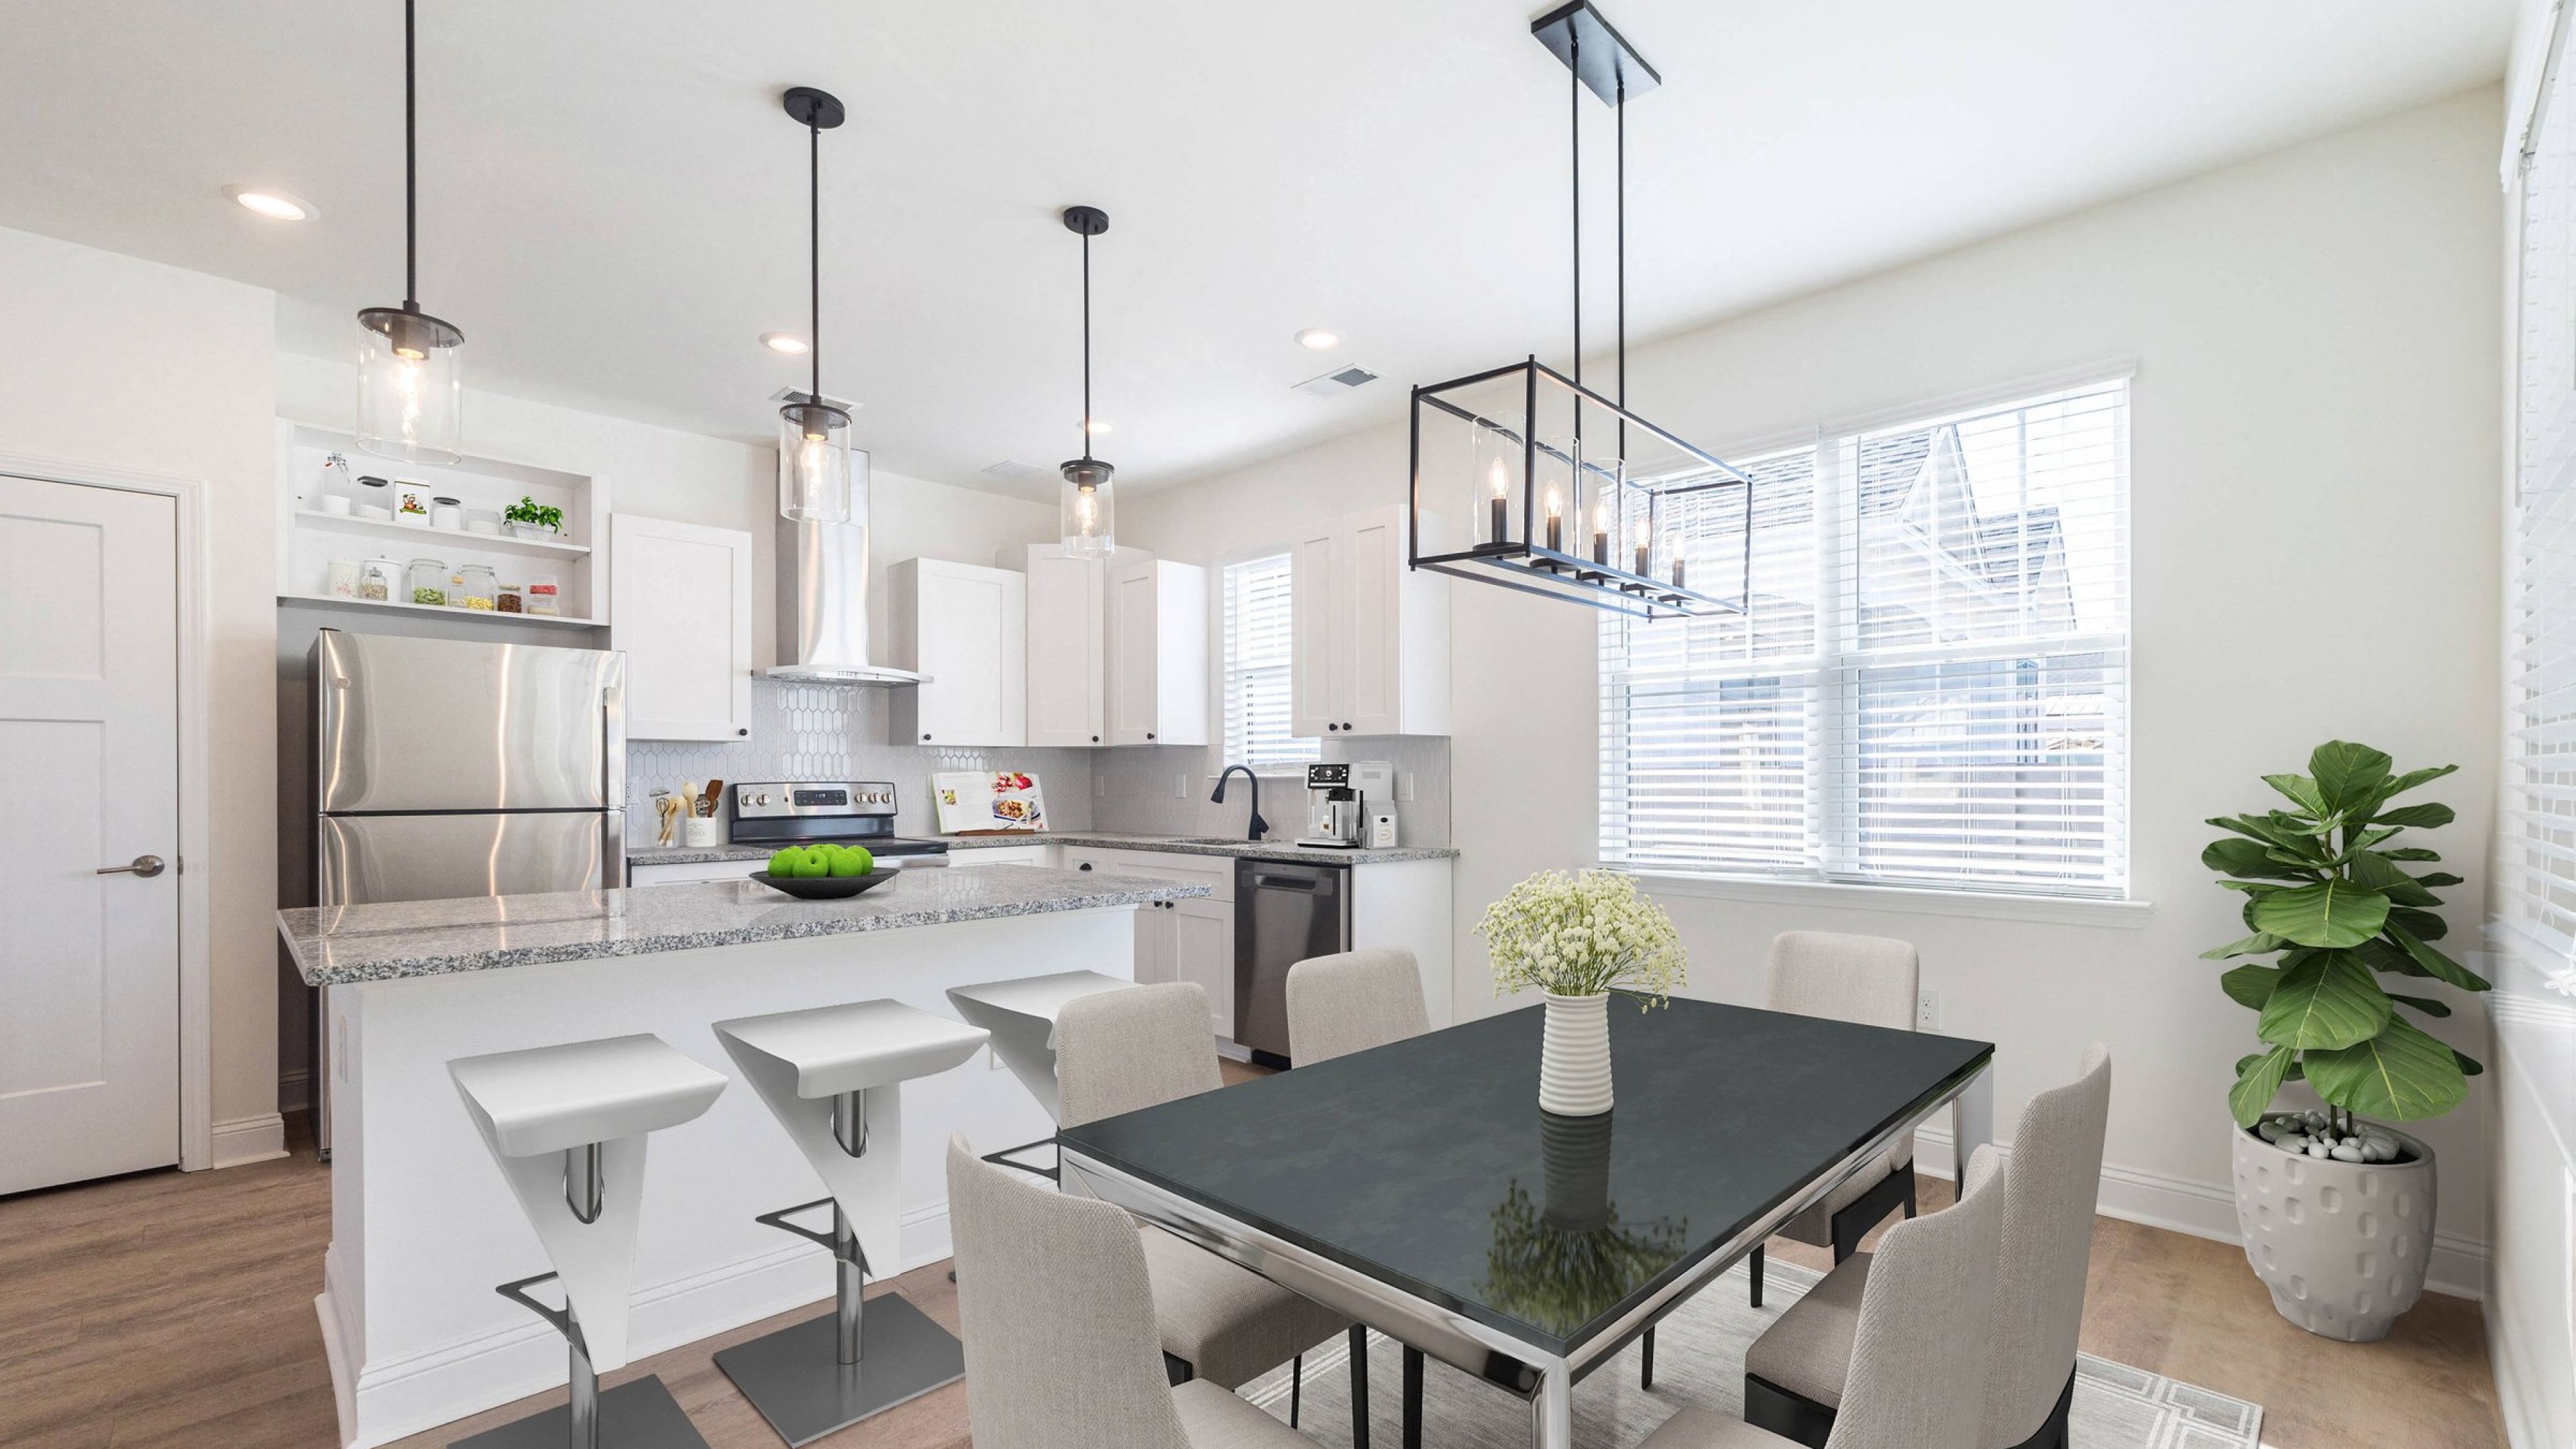 Hawthorne Cottages at Leland luxury kitchen with island, pendant lighting, stainless steel appliances, and custom cabinetry in for rent home